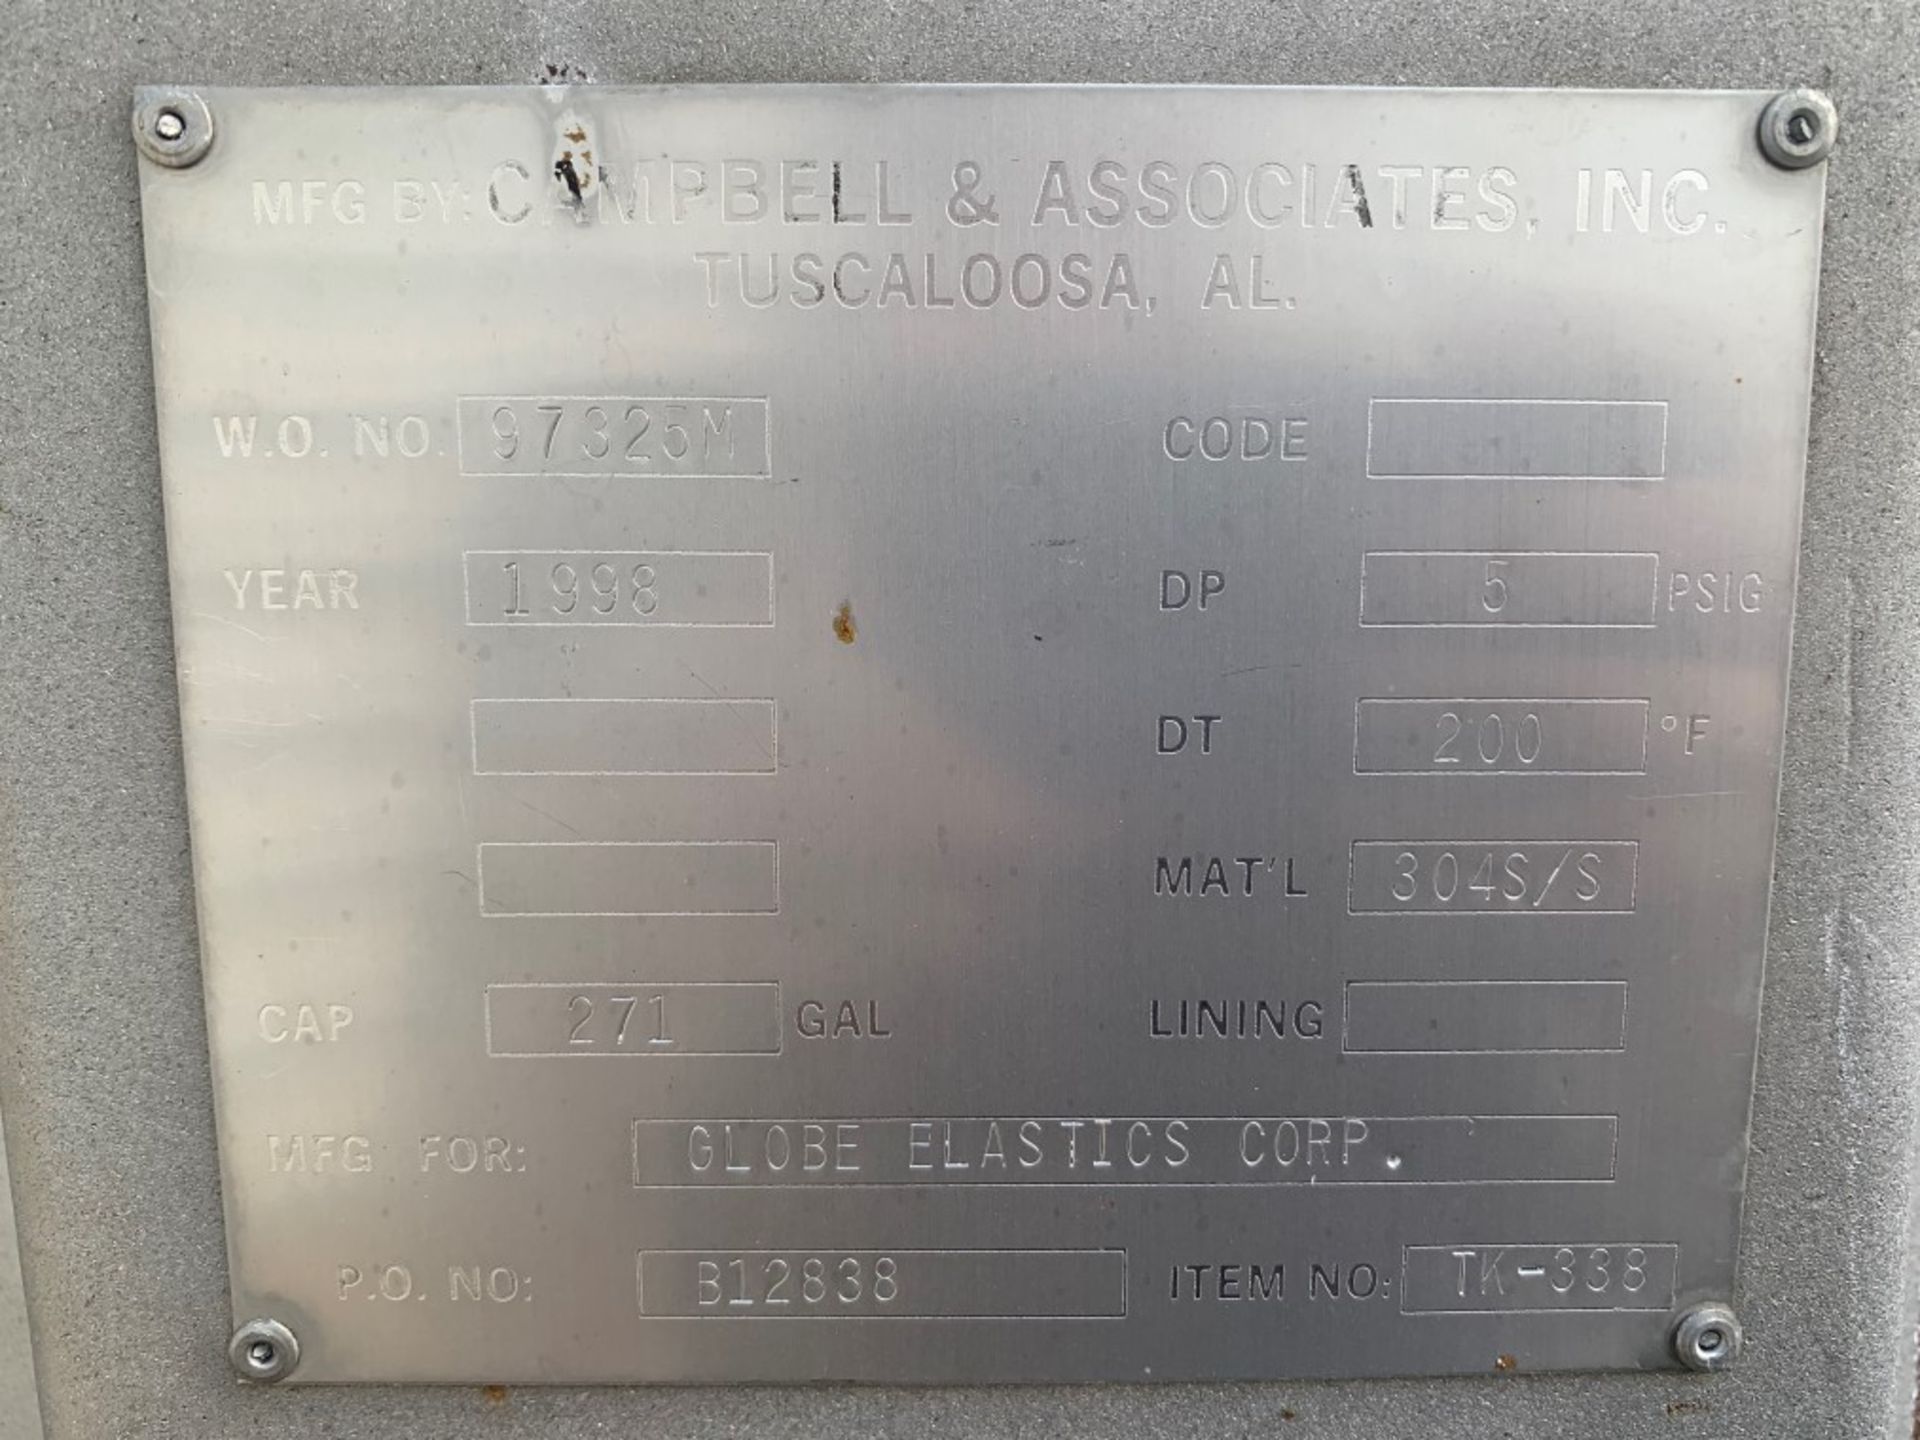 Approx 5.5’ x 3’ 271 Gal Campbell 304 Stainless Steel Tank Manuf: Campbell Category: Tank Capac - Image 6 of 9